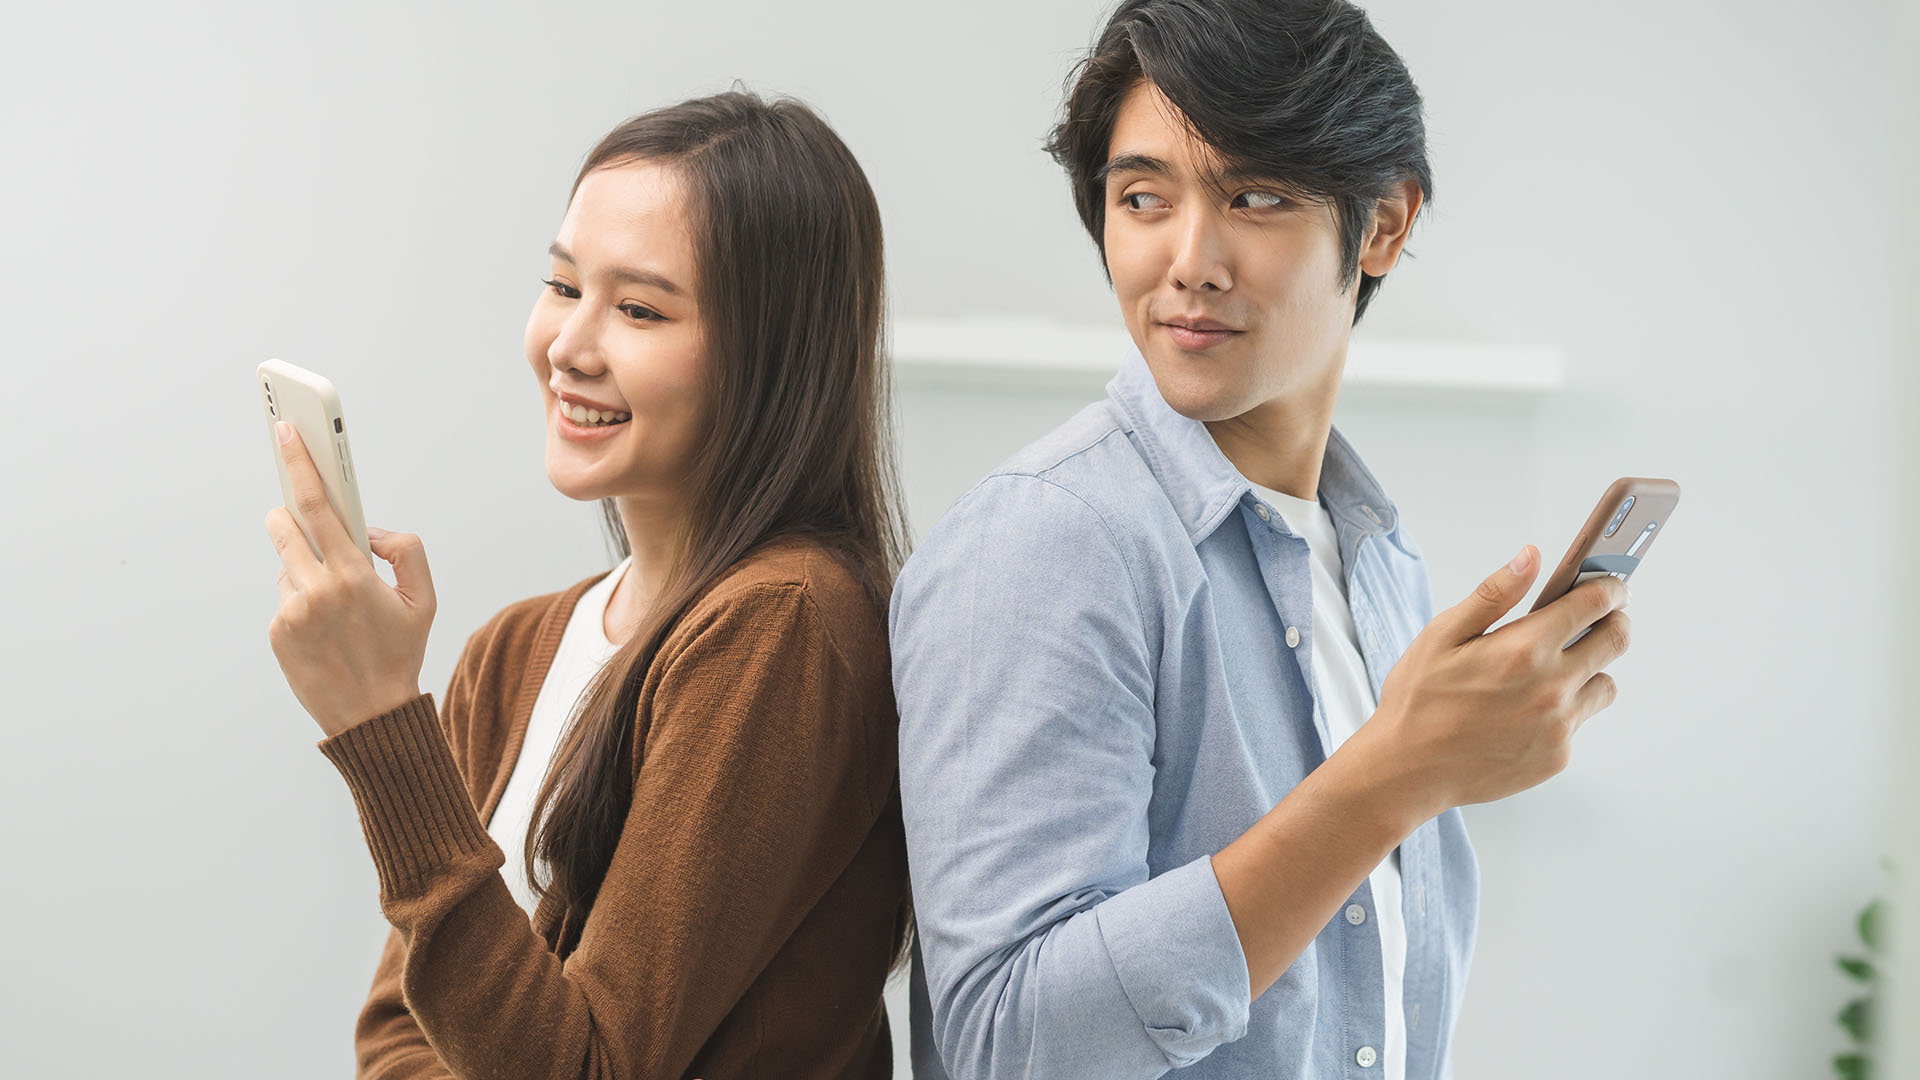 Brunette Asian man and woman, standing back to back and holding their phones. The man is looking at the woman who is smiling.